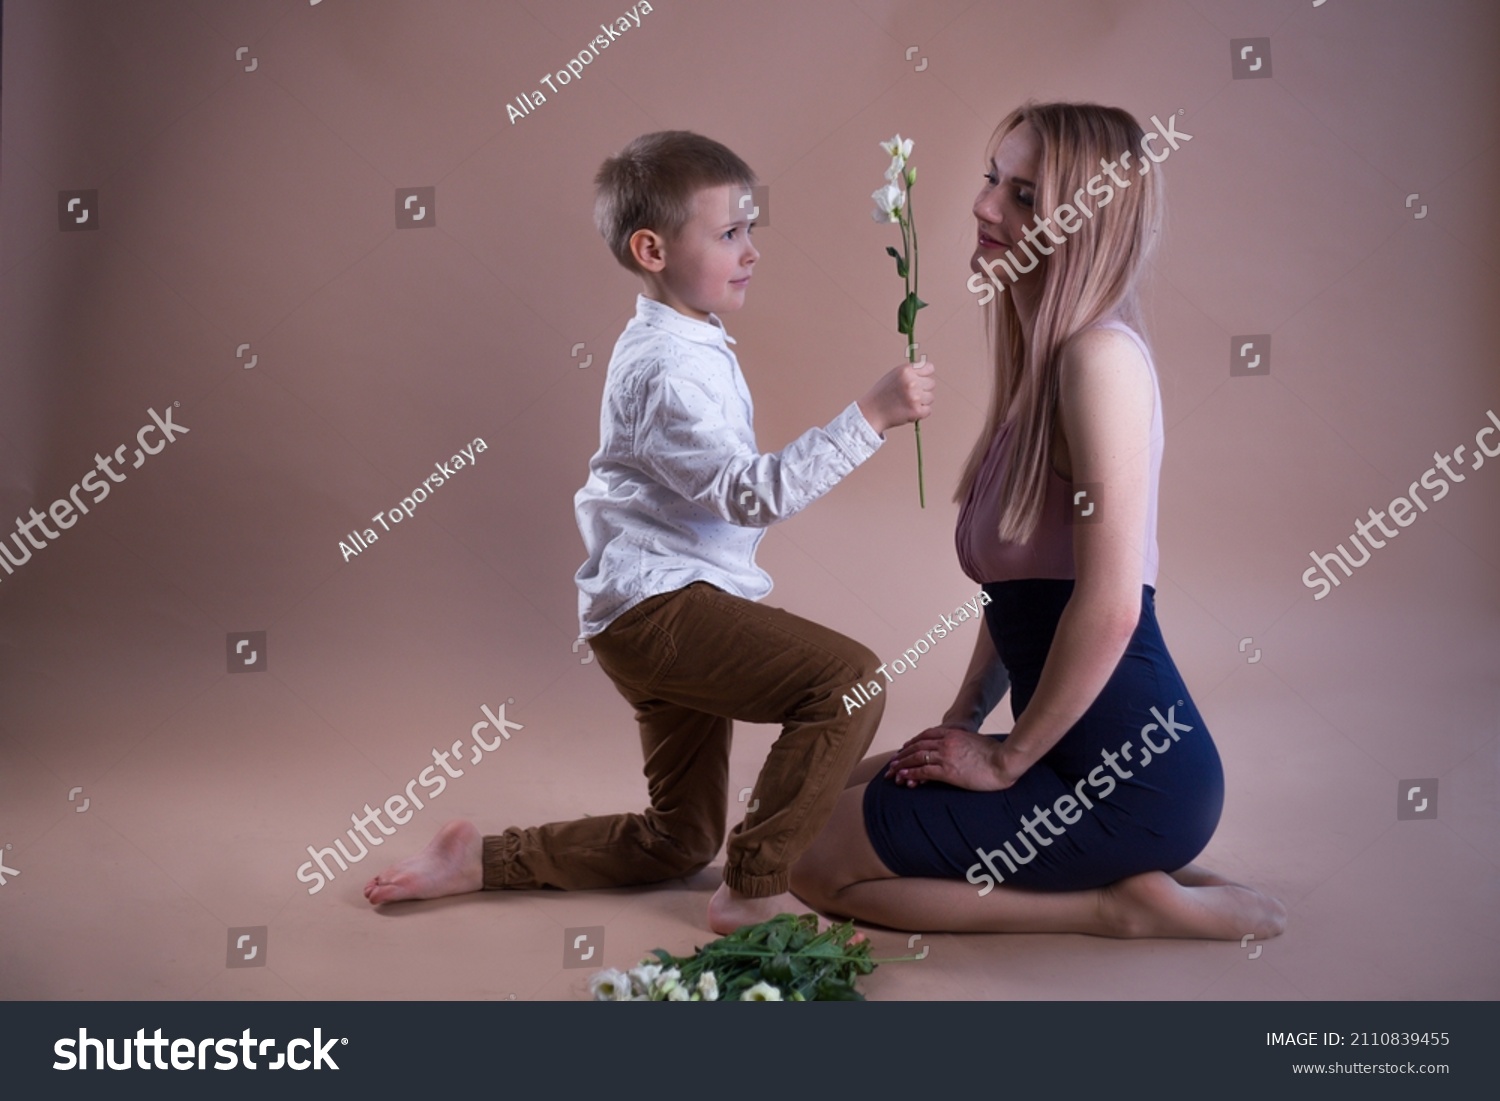 A cute European blonde boy kneels and gives white flowers to a beautiful European girl with blonde hair in the studio on a brown background. #2110839455